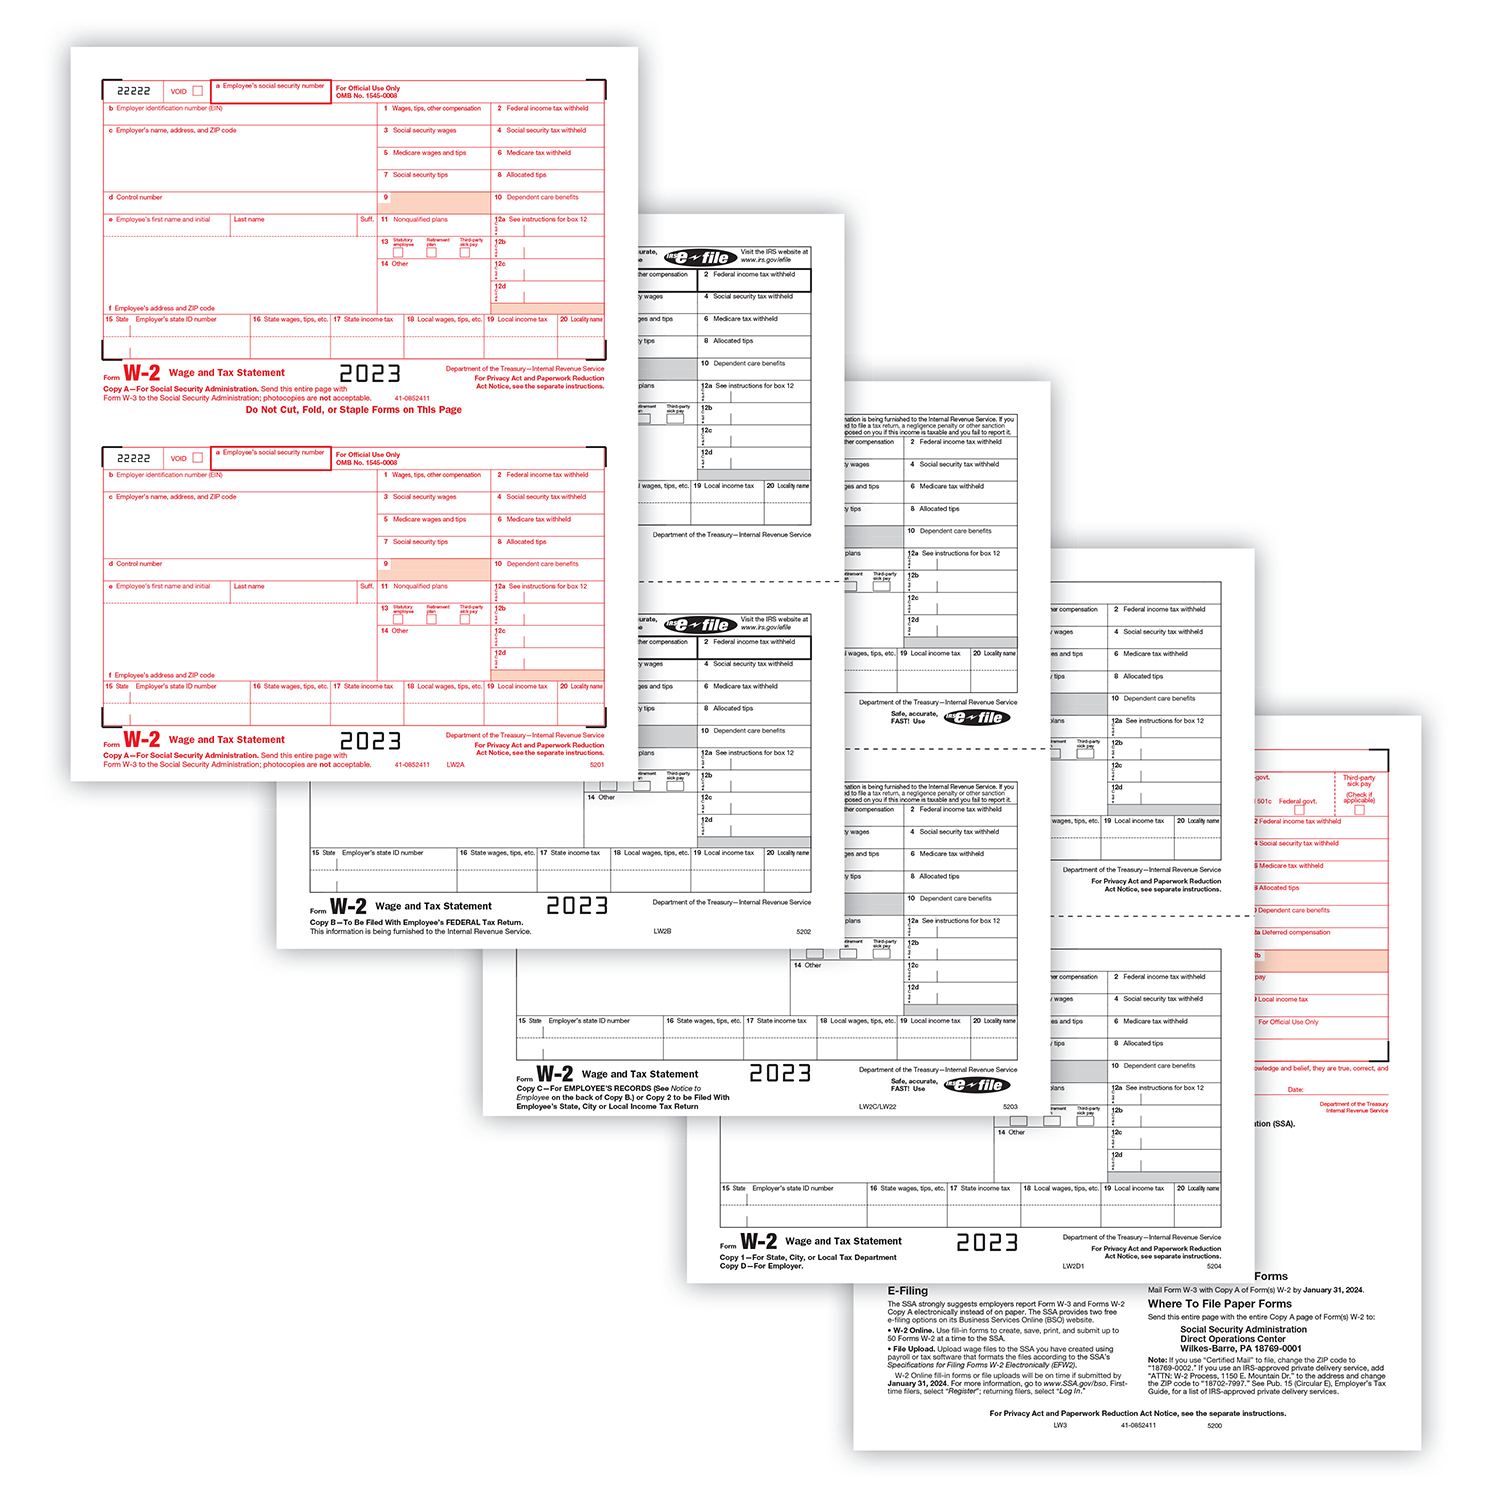 Picture of W-2 Set, Copy A,B,C,D,1,1,2,2 (100 Employees/Recipients)